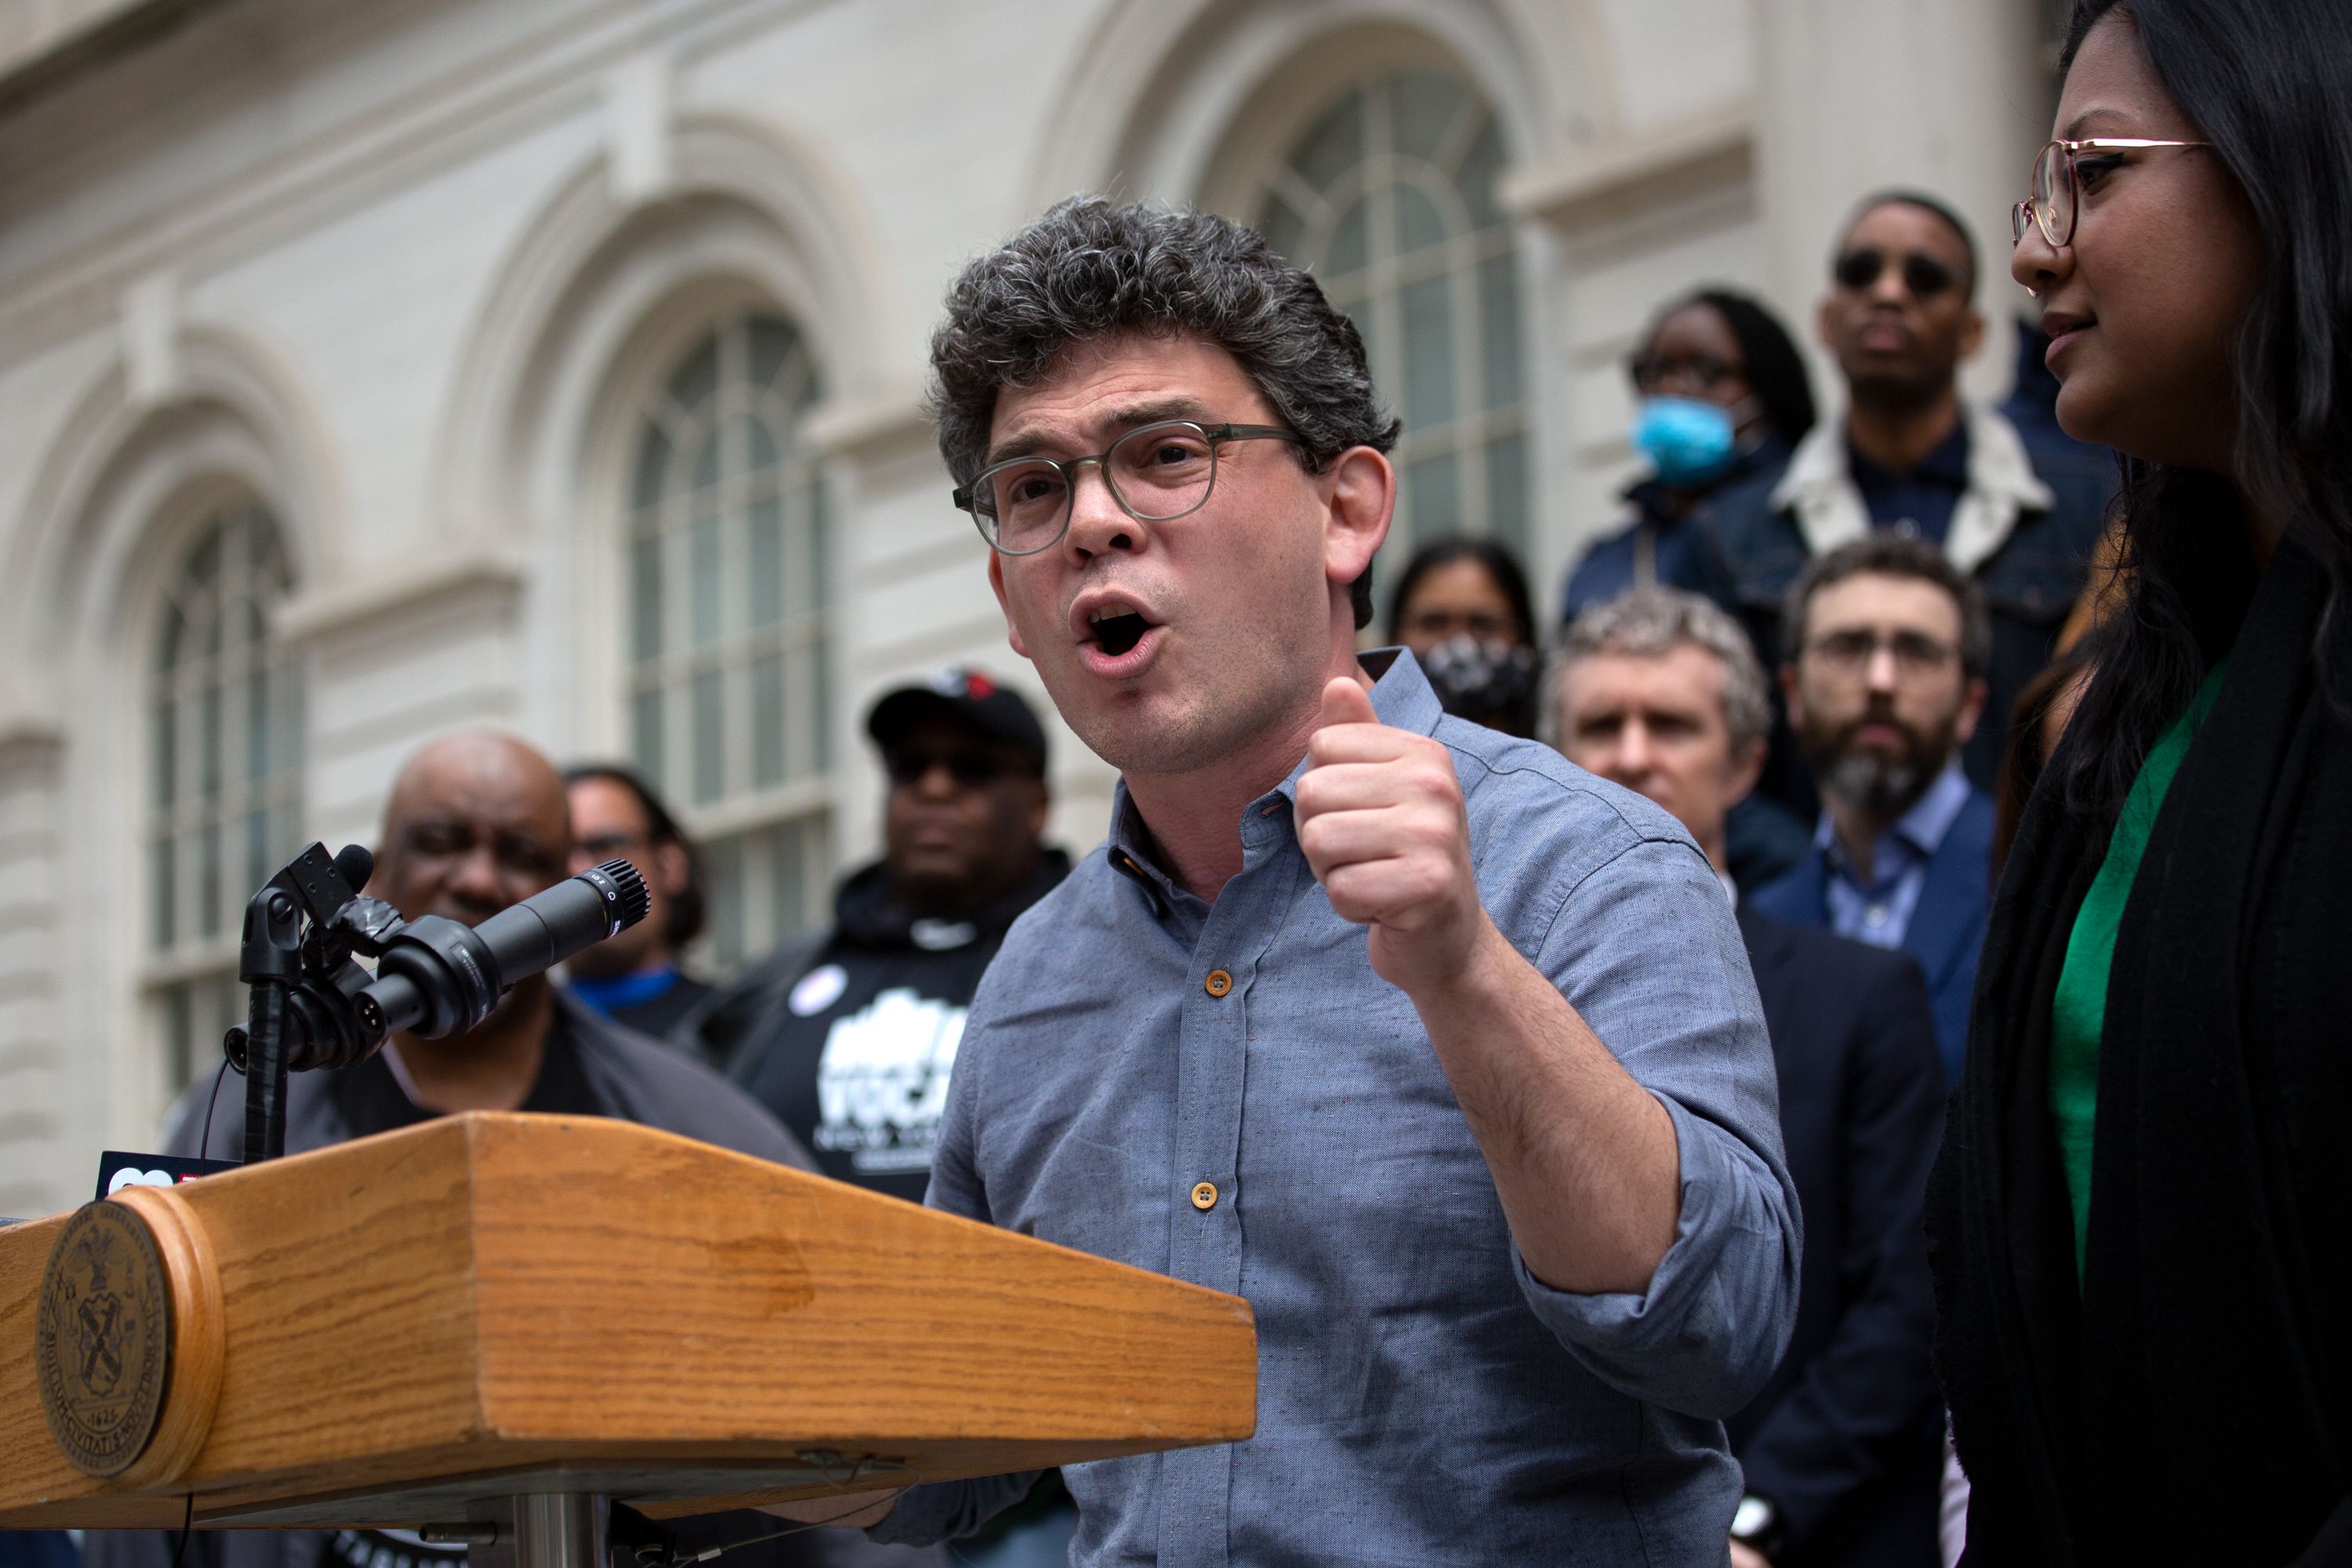 Councilmember Lincoln Restler (D-Brooklyn) speaks at a City Hall rally calling on Mayor Eric Adams to invest more in affordable housing and homeless services, April 21, 2022.